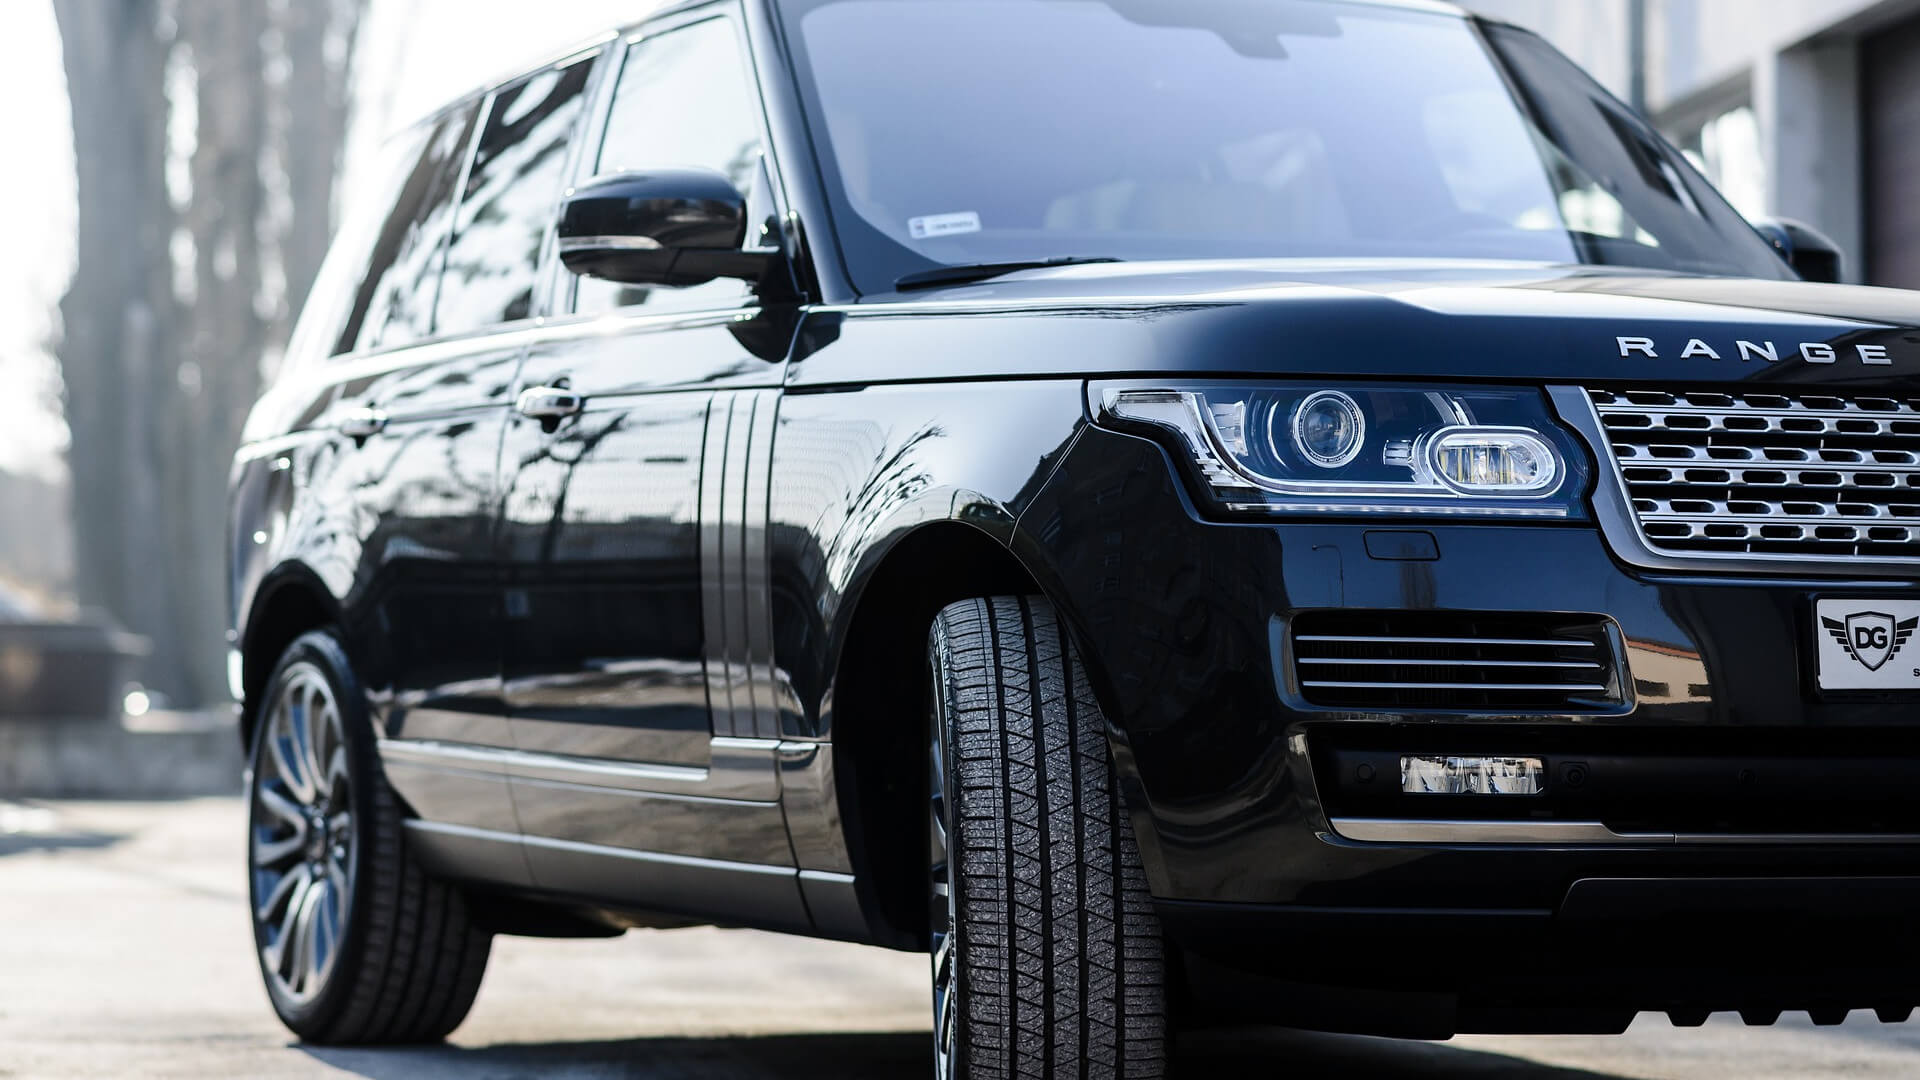 Direct4x4 Accessories for Range Rover Vogue Vehicles